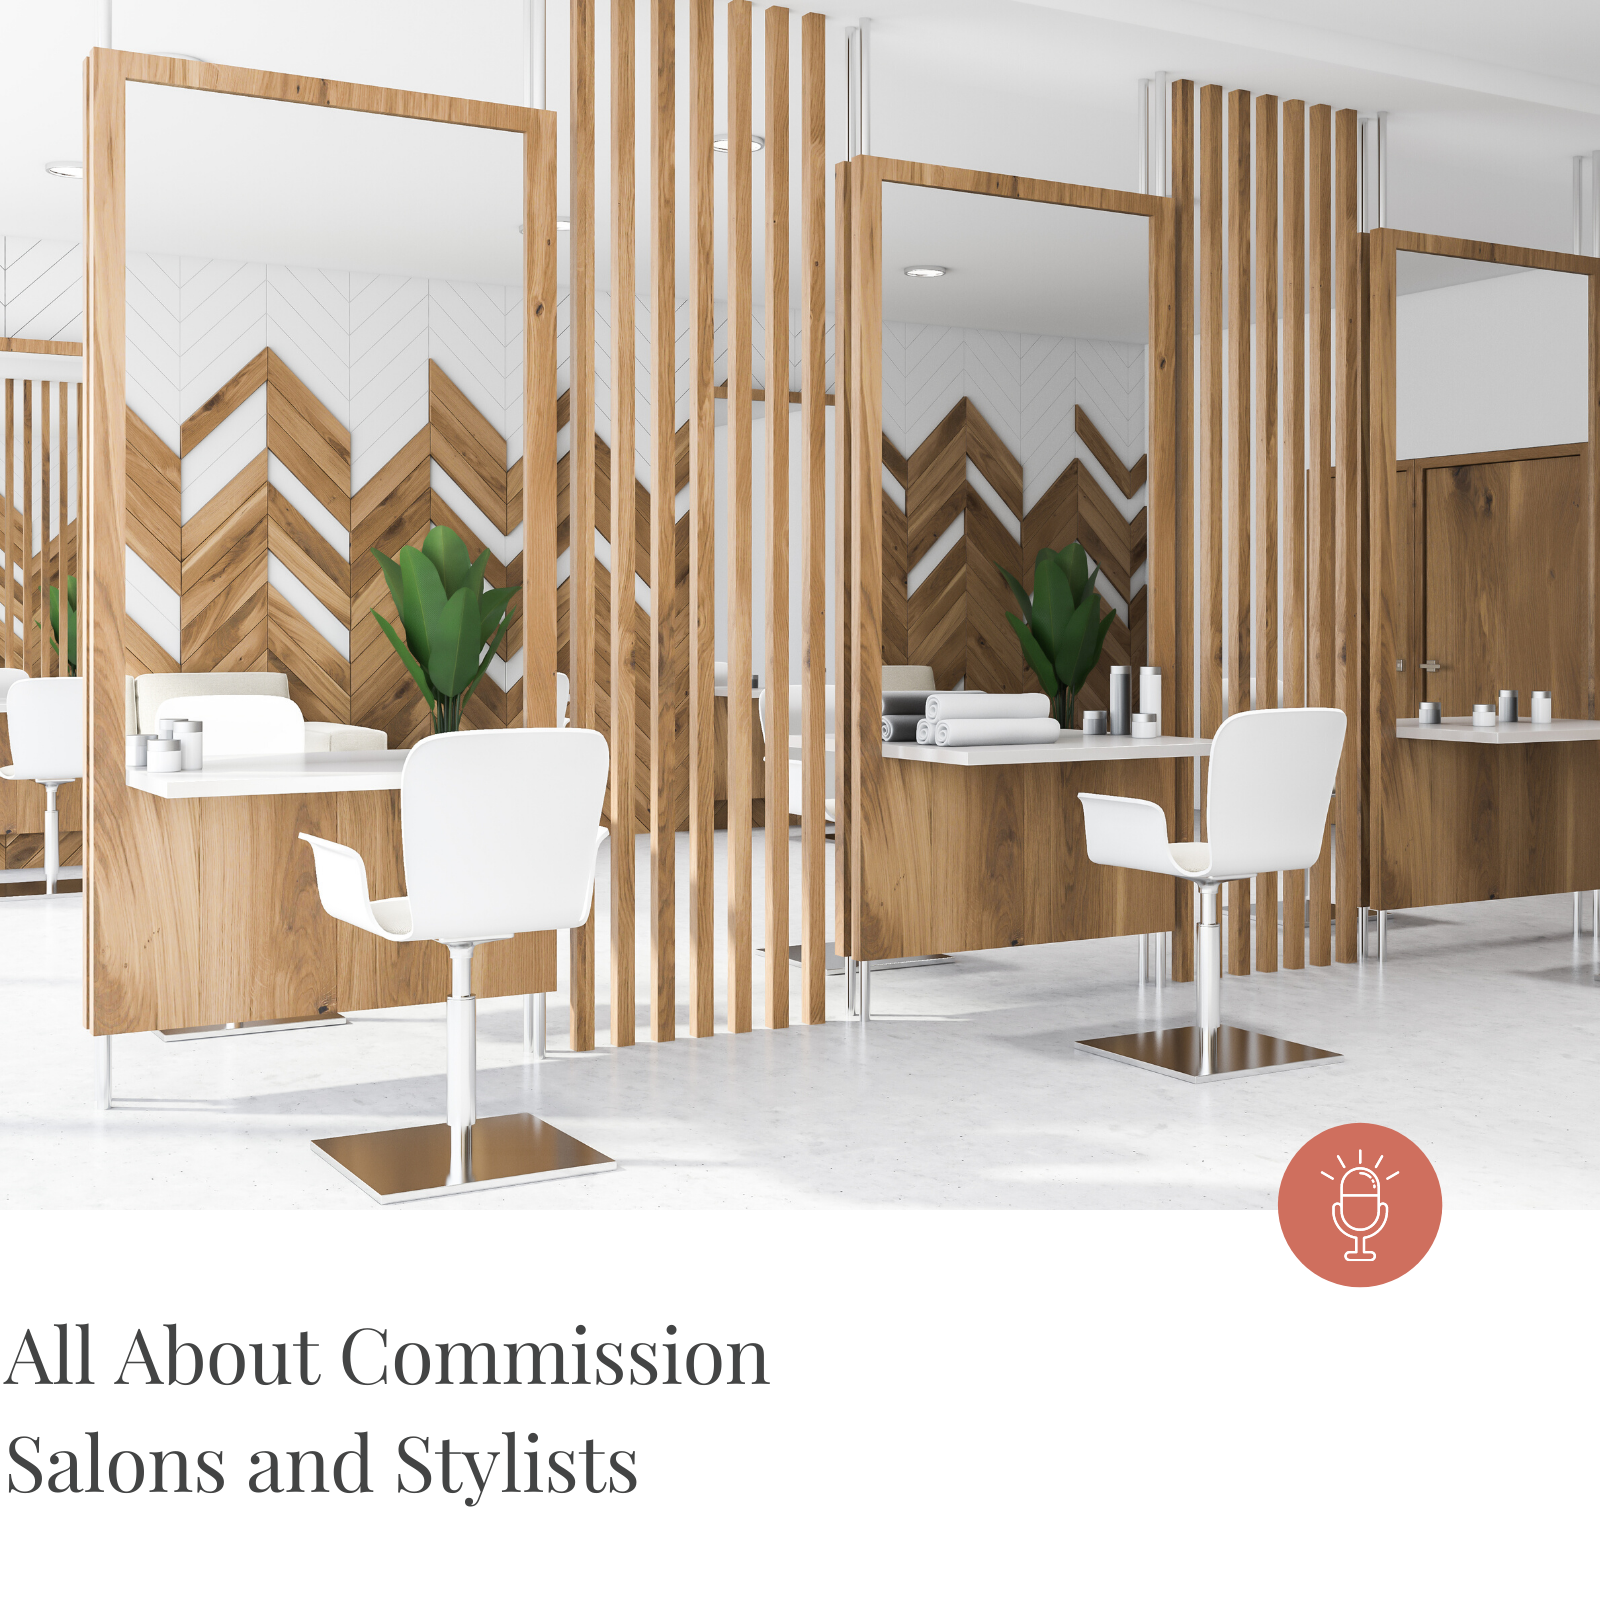 Episode #192- All About Commission Salons and Stylists